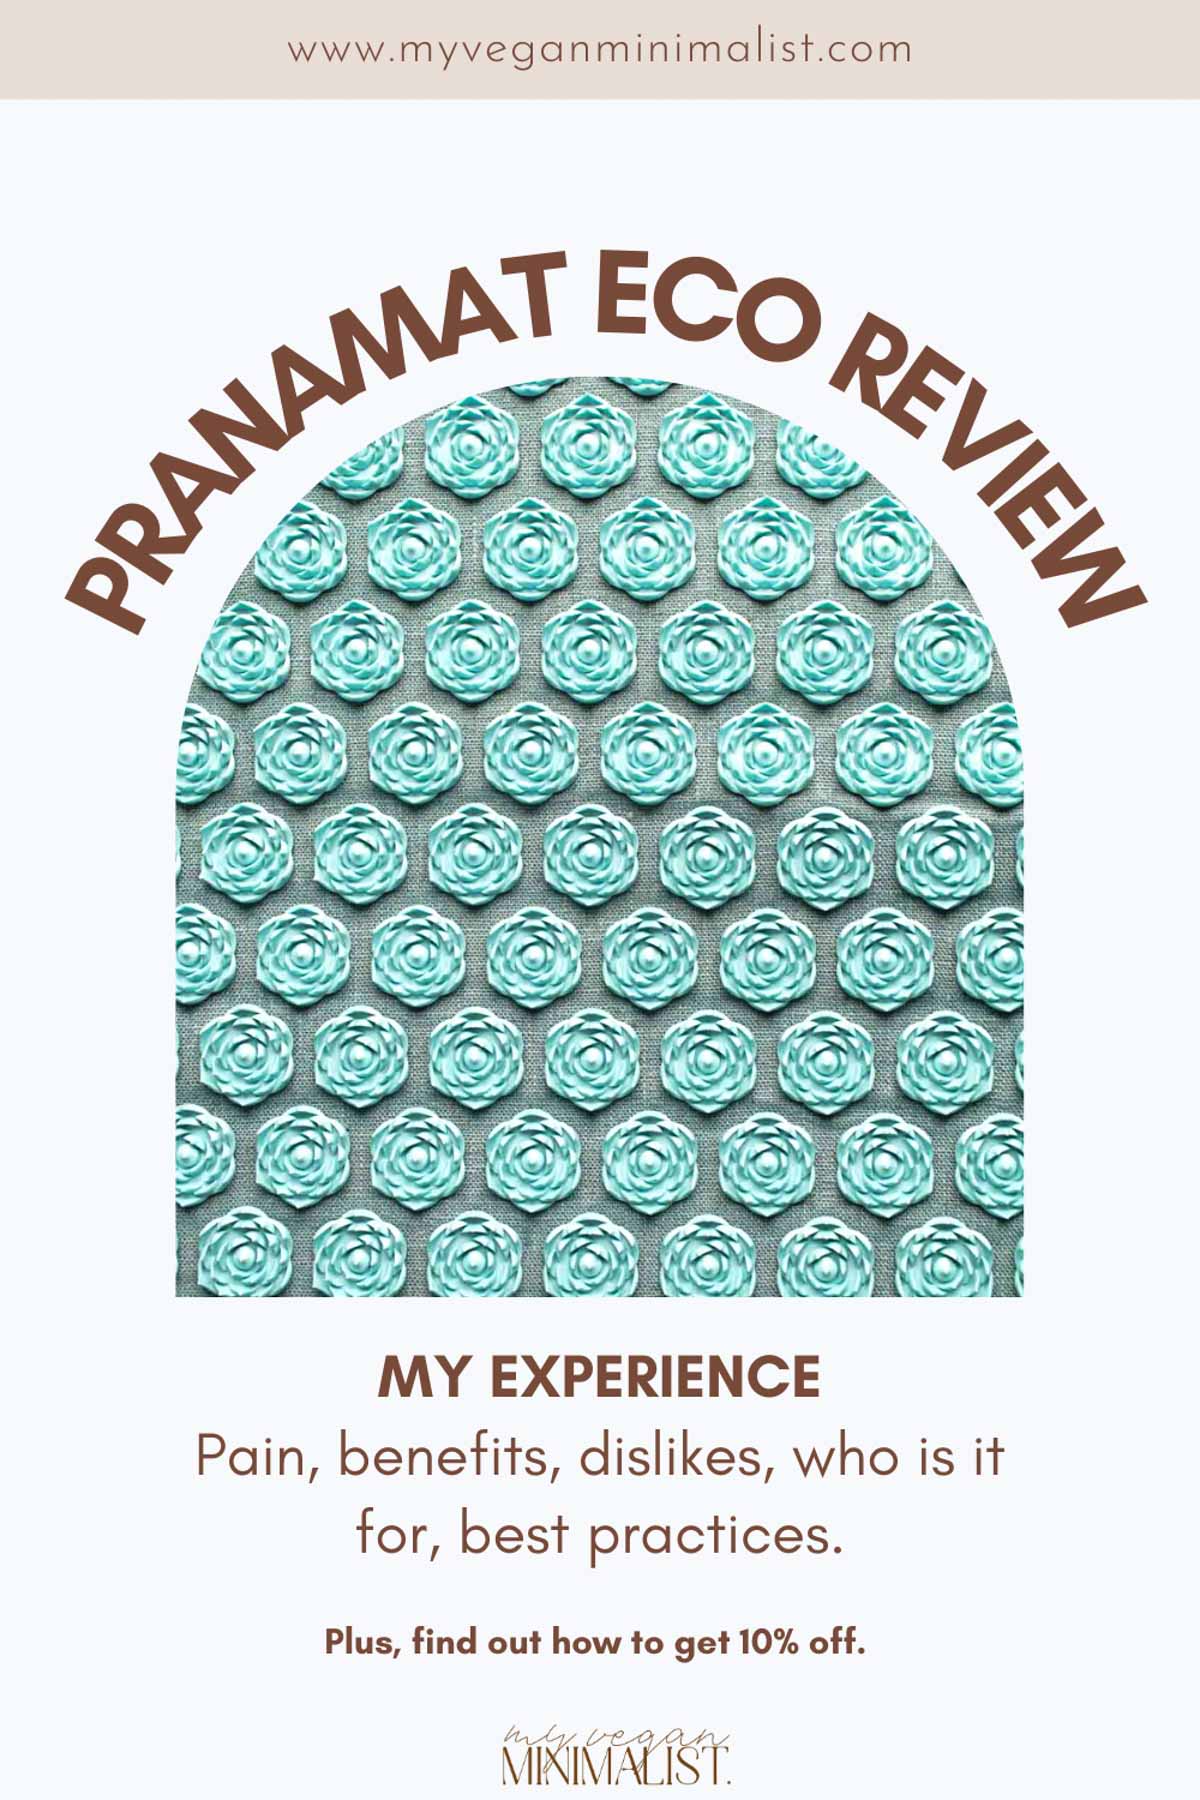 A graphic with a text Pranamat Review in the centre. 